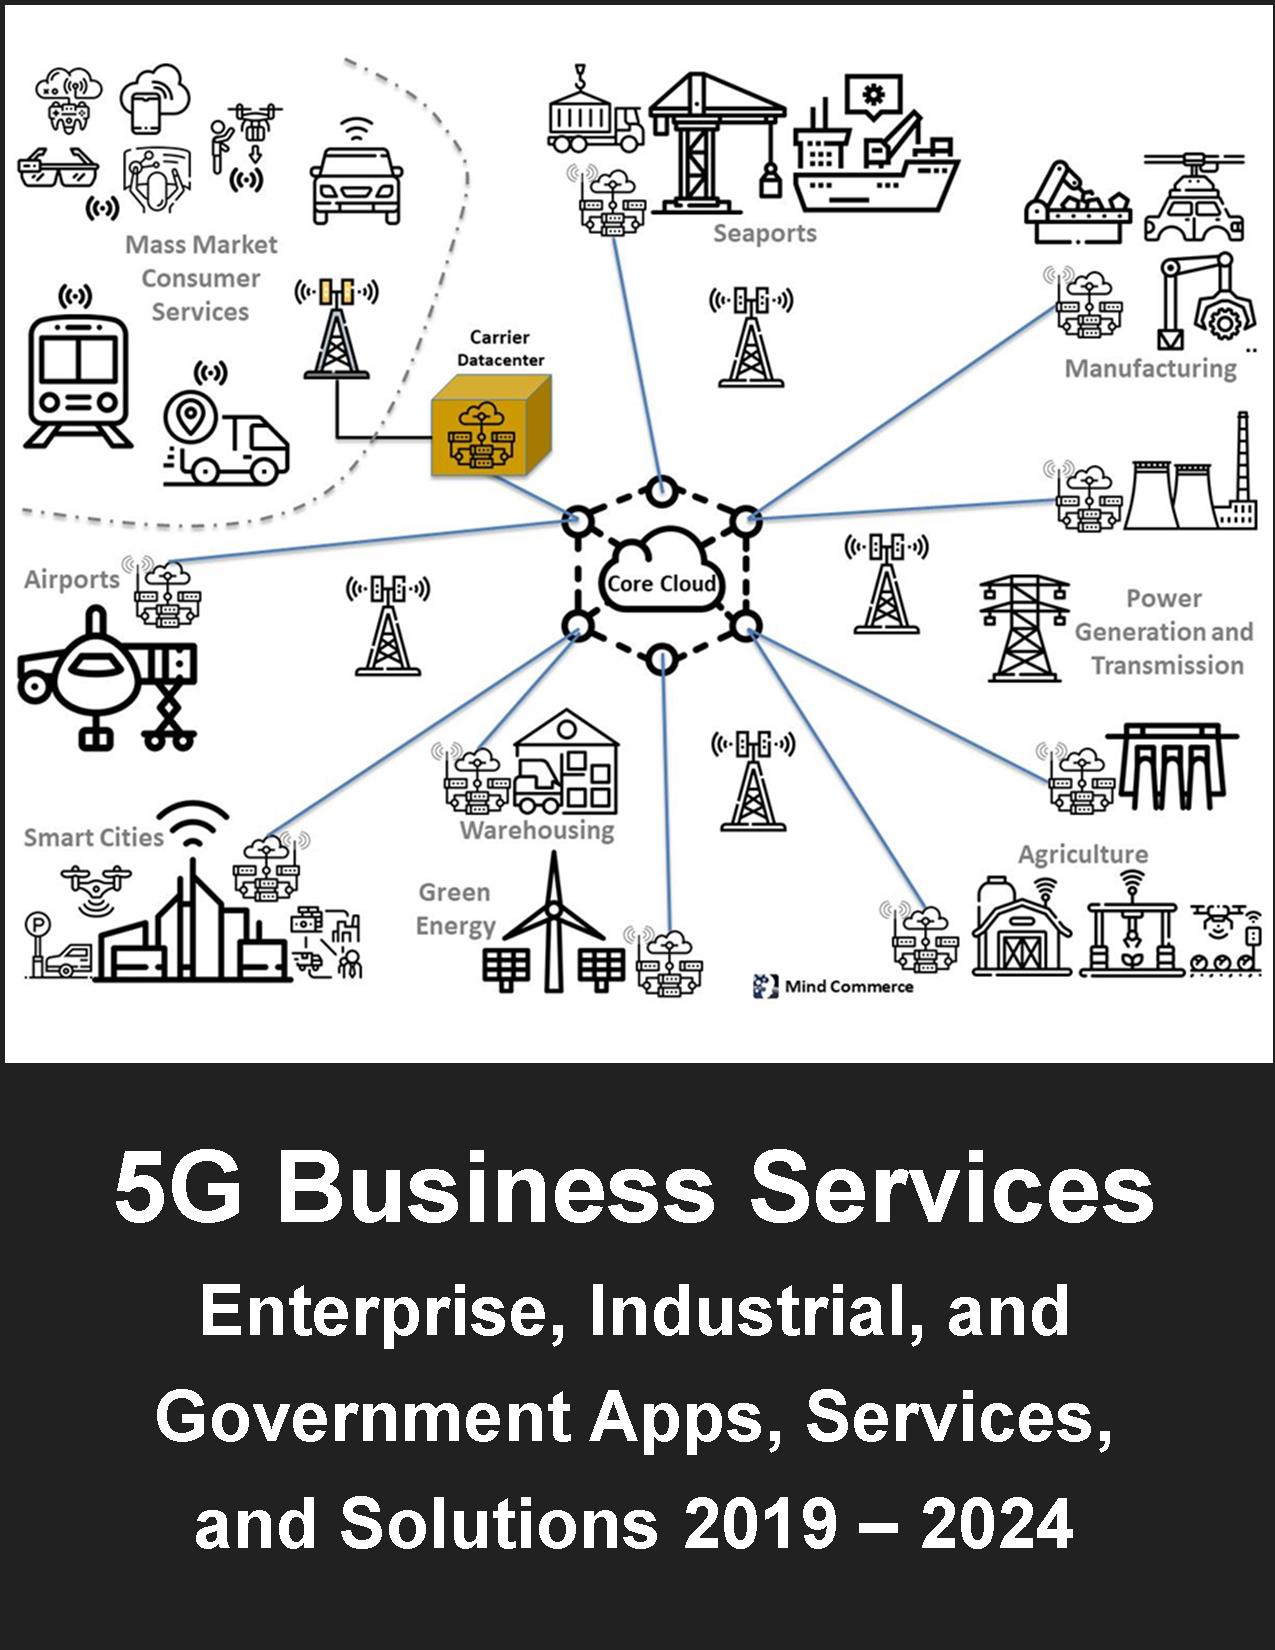 5G Business Services Market by Enterprise, Industrial, and Government Segment Applications, Services, and Solutions 2019